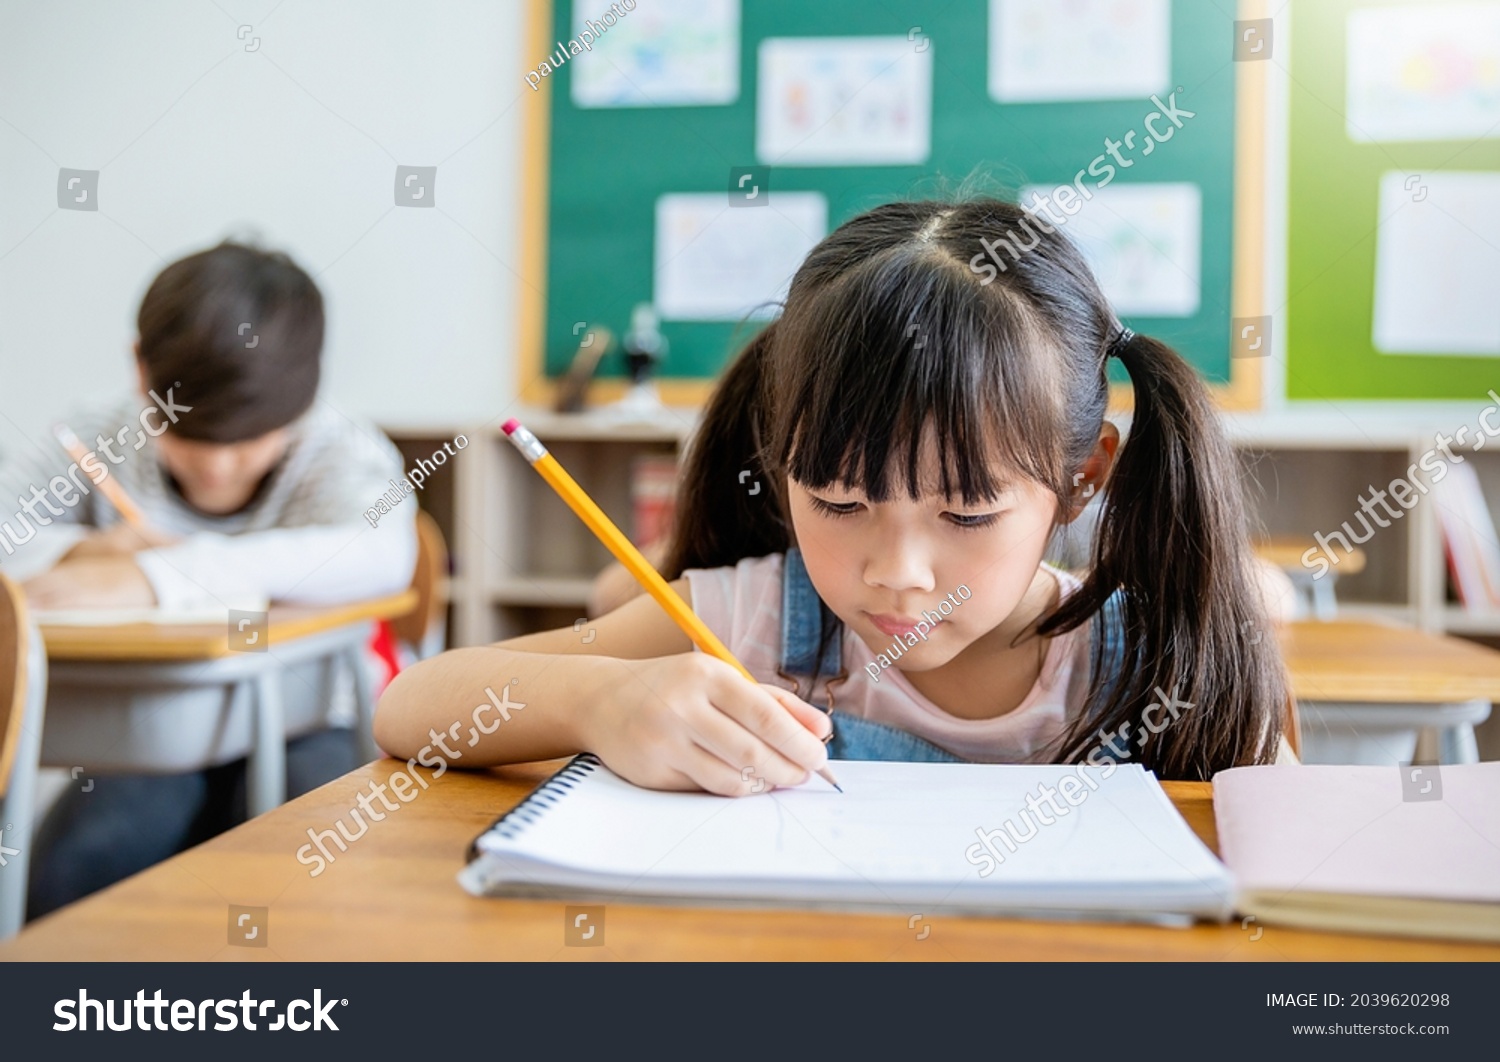 Portrait of little pupil writing at desk in classroom at the elementary school. Student girl study doing test in primary school. Children writing notes in classroom. Education knowledge concept #2039620298